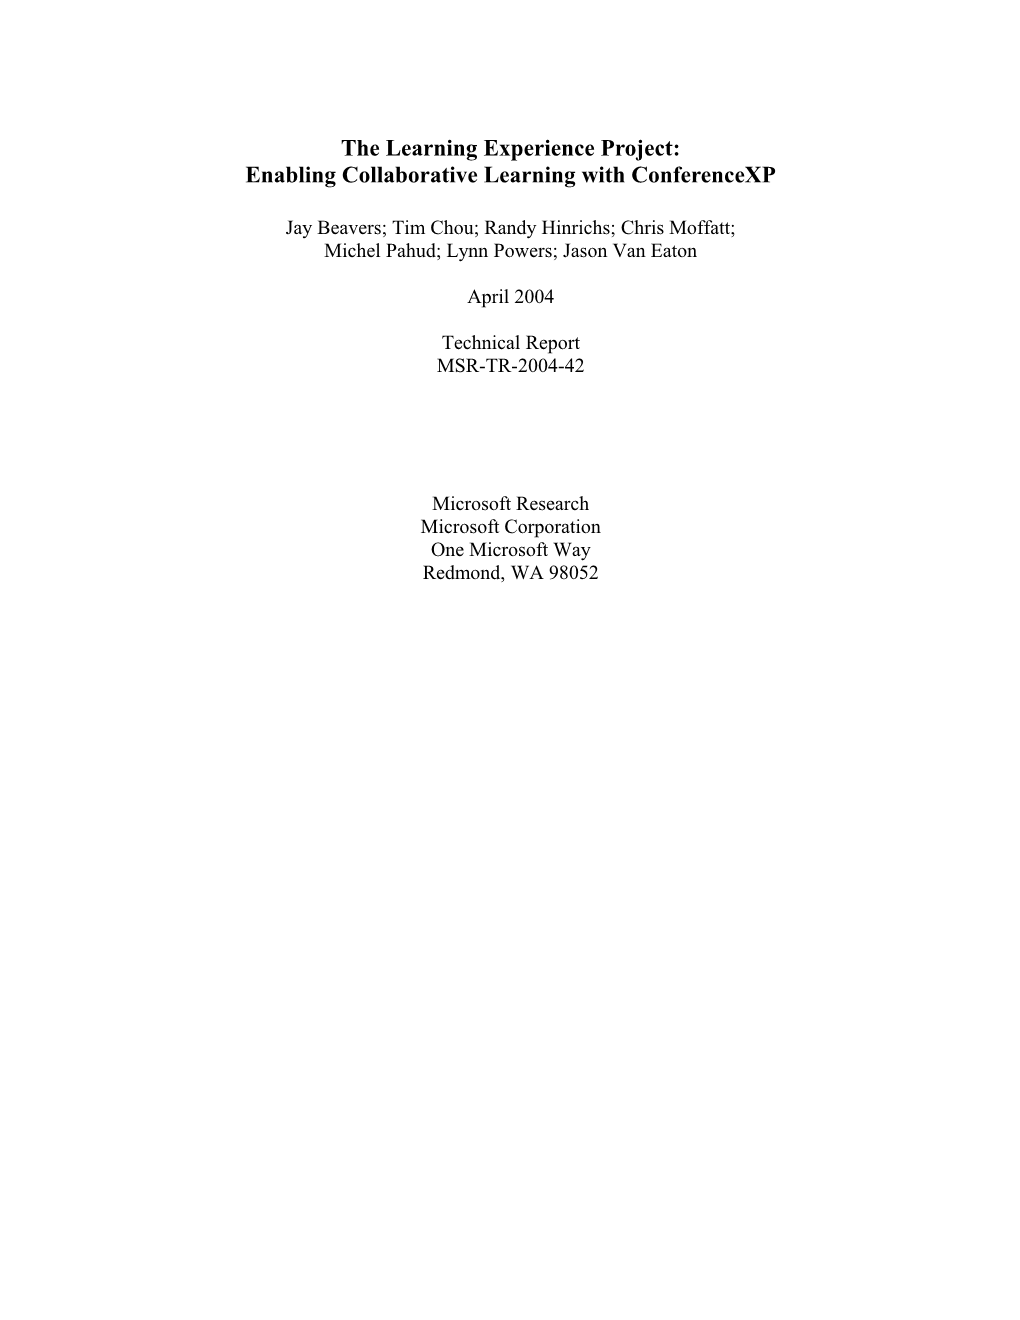 The Learning Experience Project: Enabling Collaborative Learning with Conferencexp